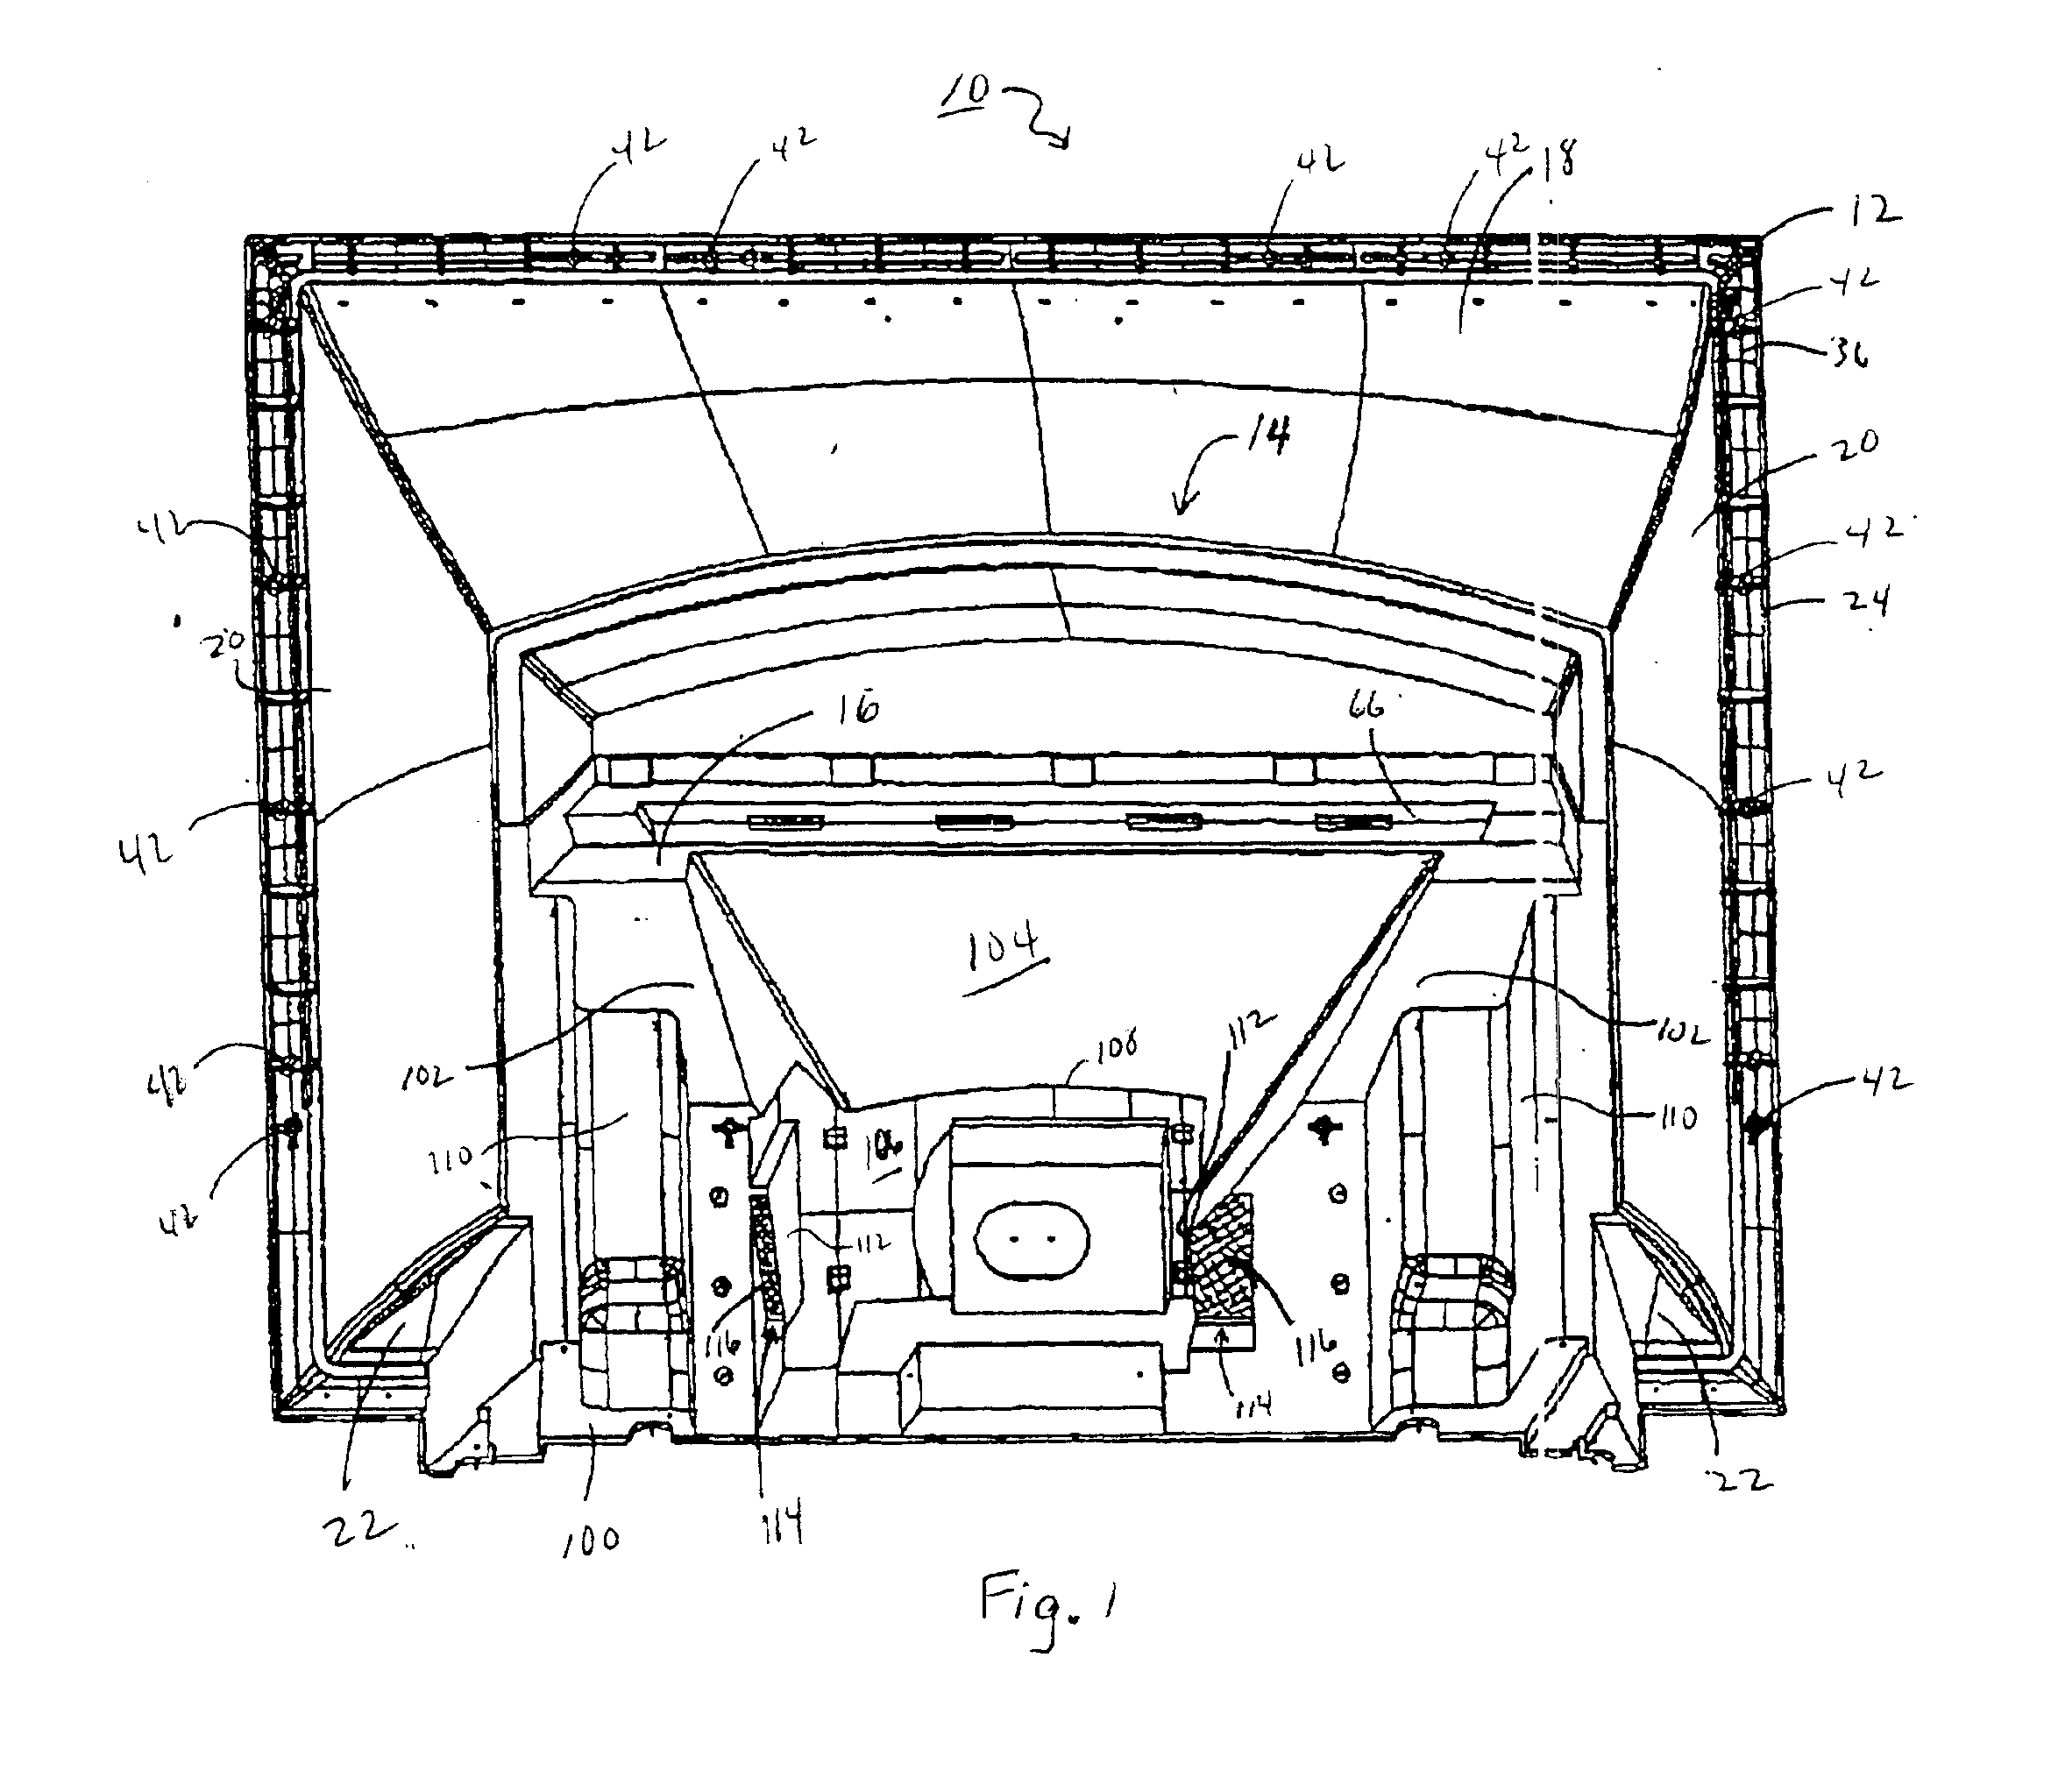 Projection television cabinet having a one-piece reference structure